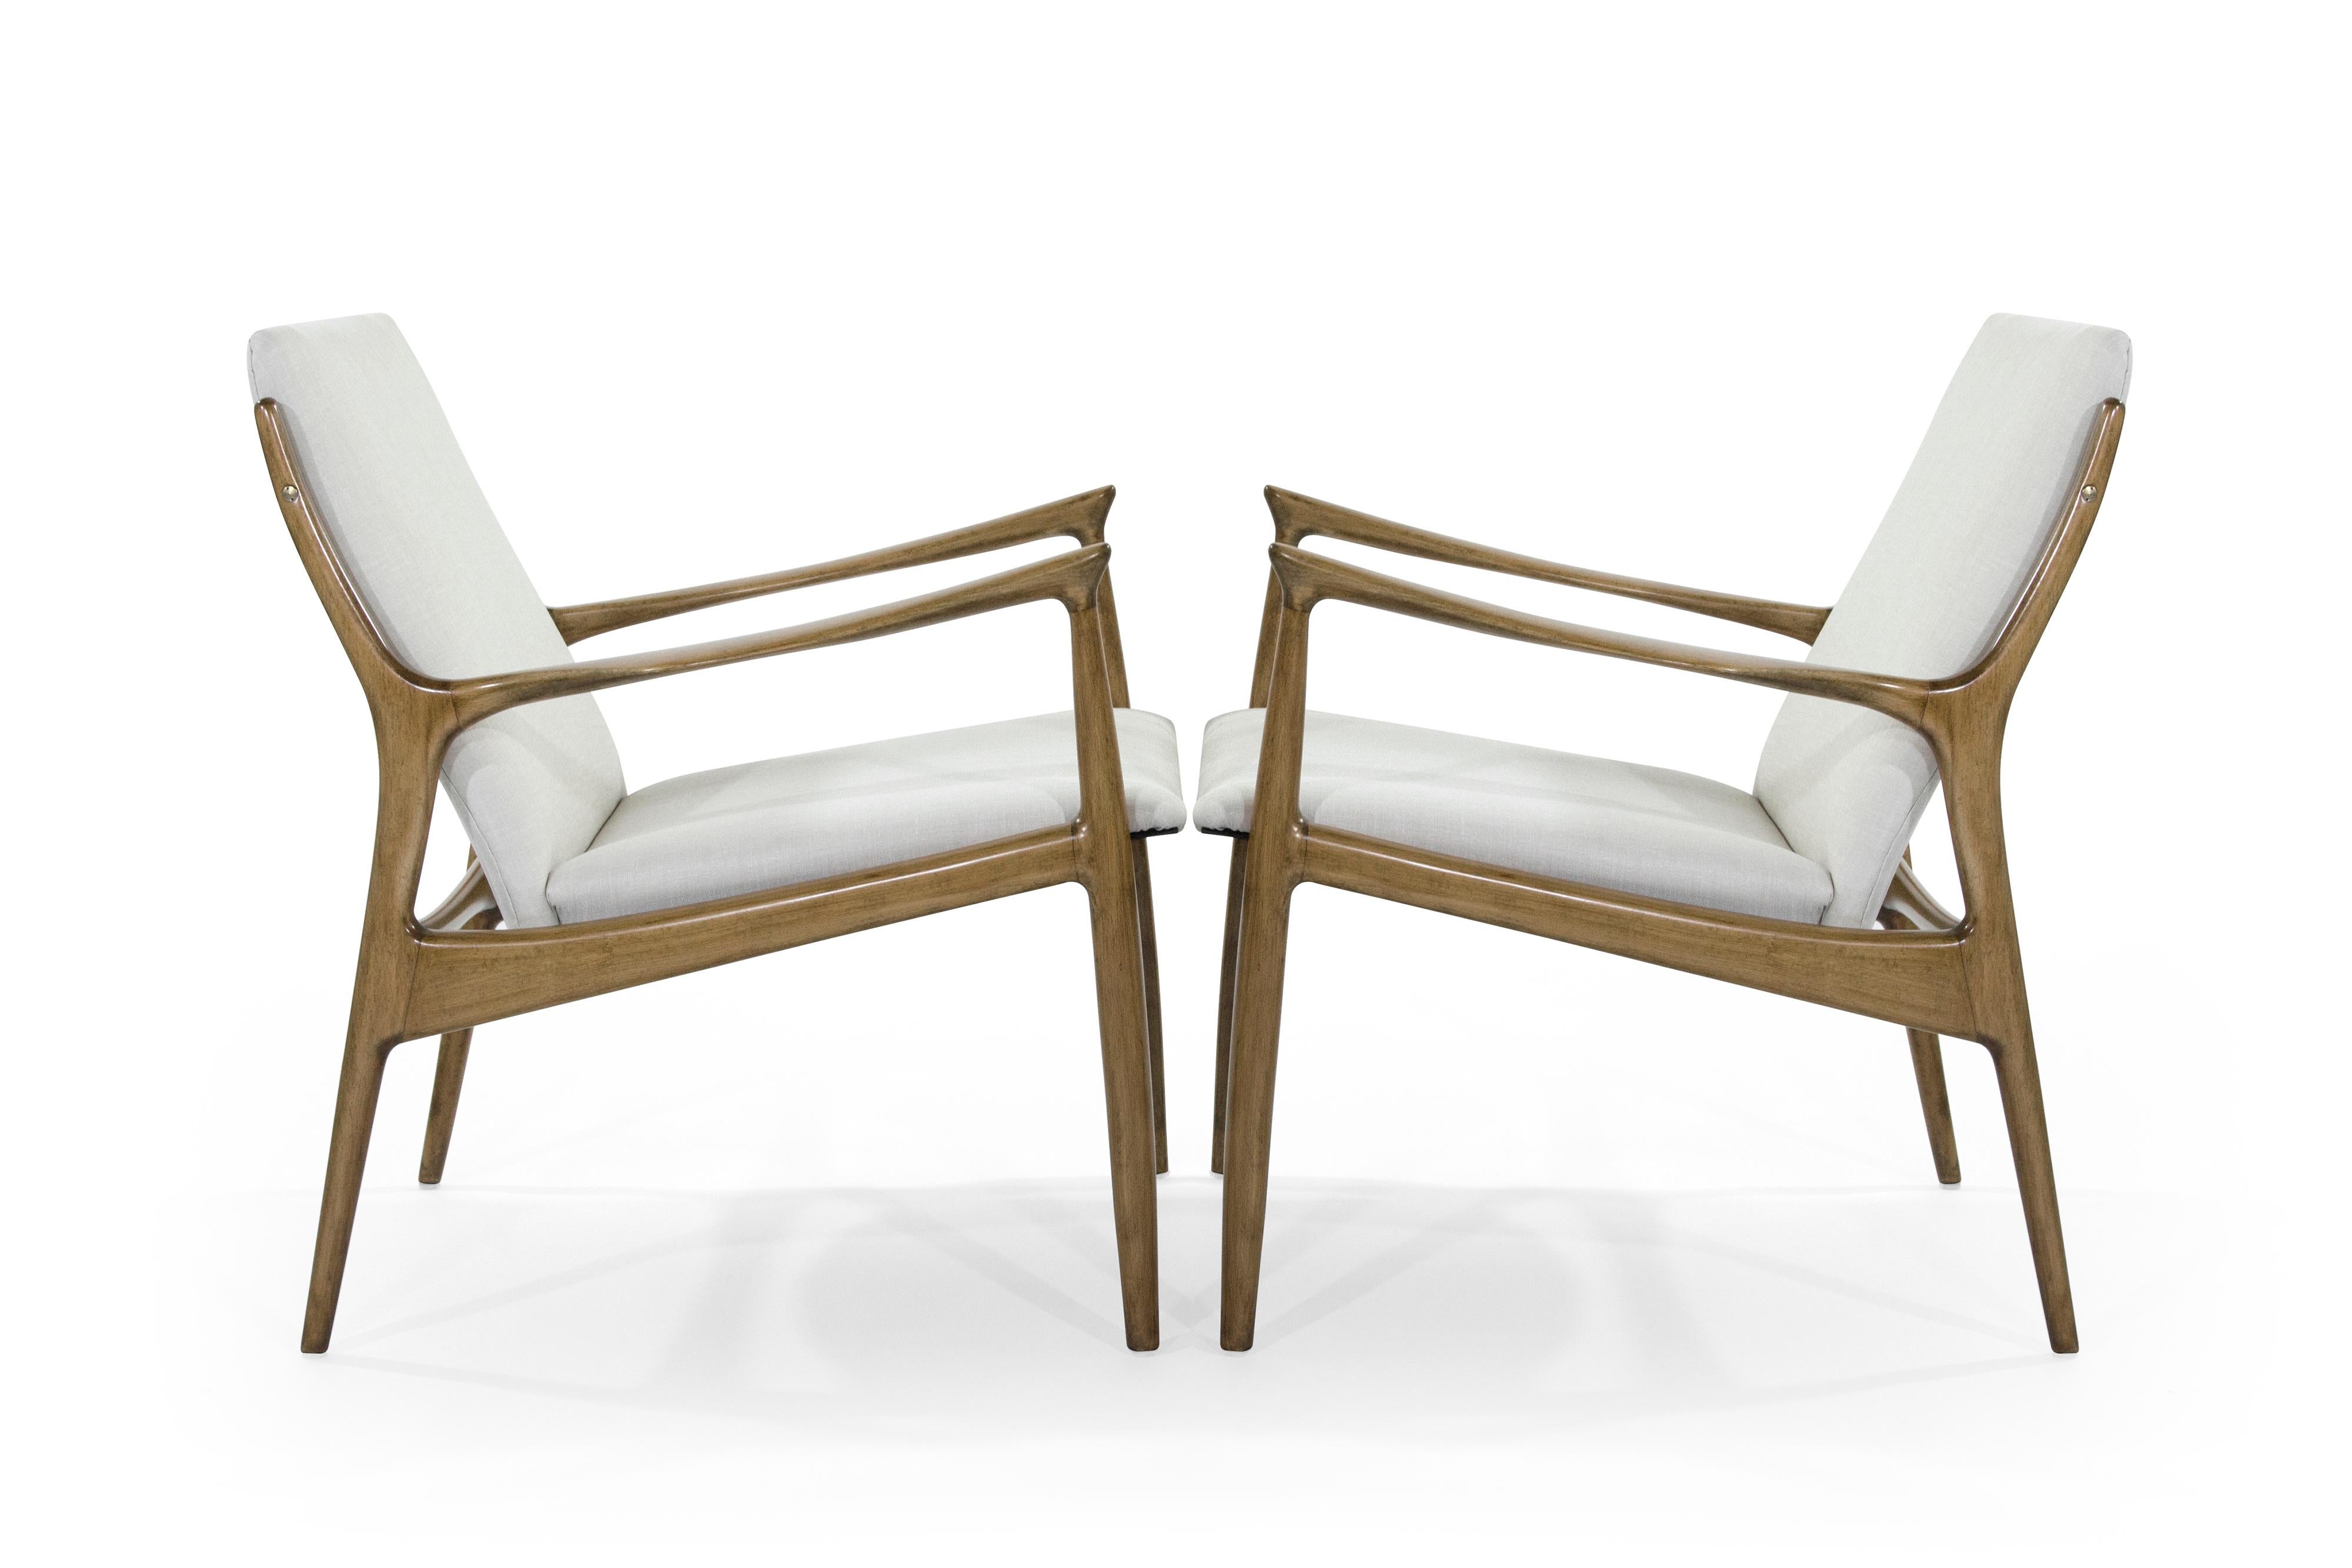 A fantastic pair of lounge chairs by Ib Kofod-Larsen, Denmark 1950s.

Beech wood frames restored to perfection, newly upholstered in off-white linen.